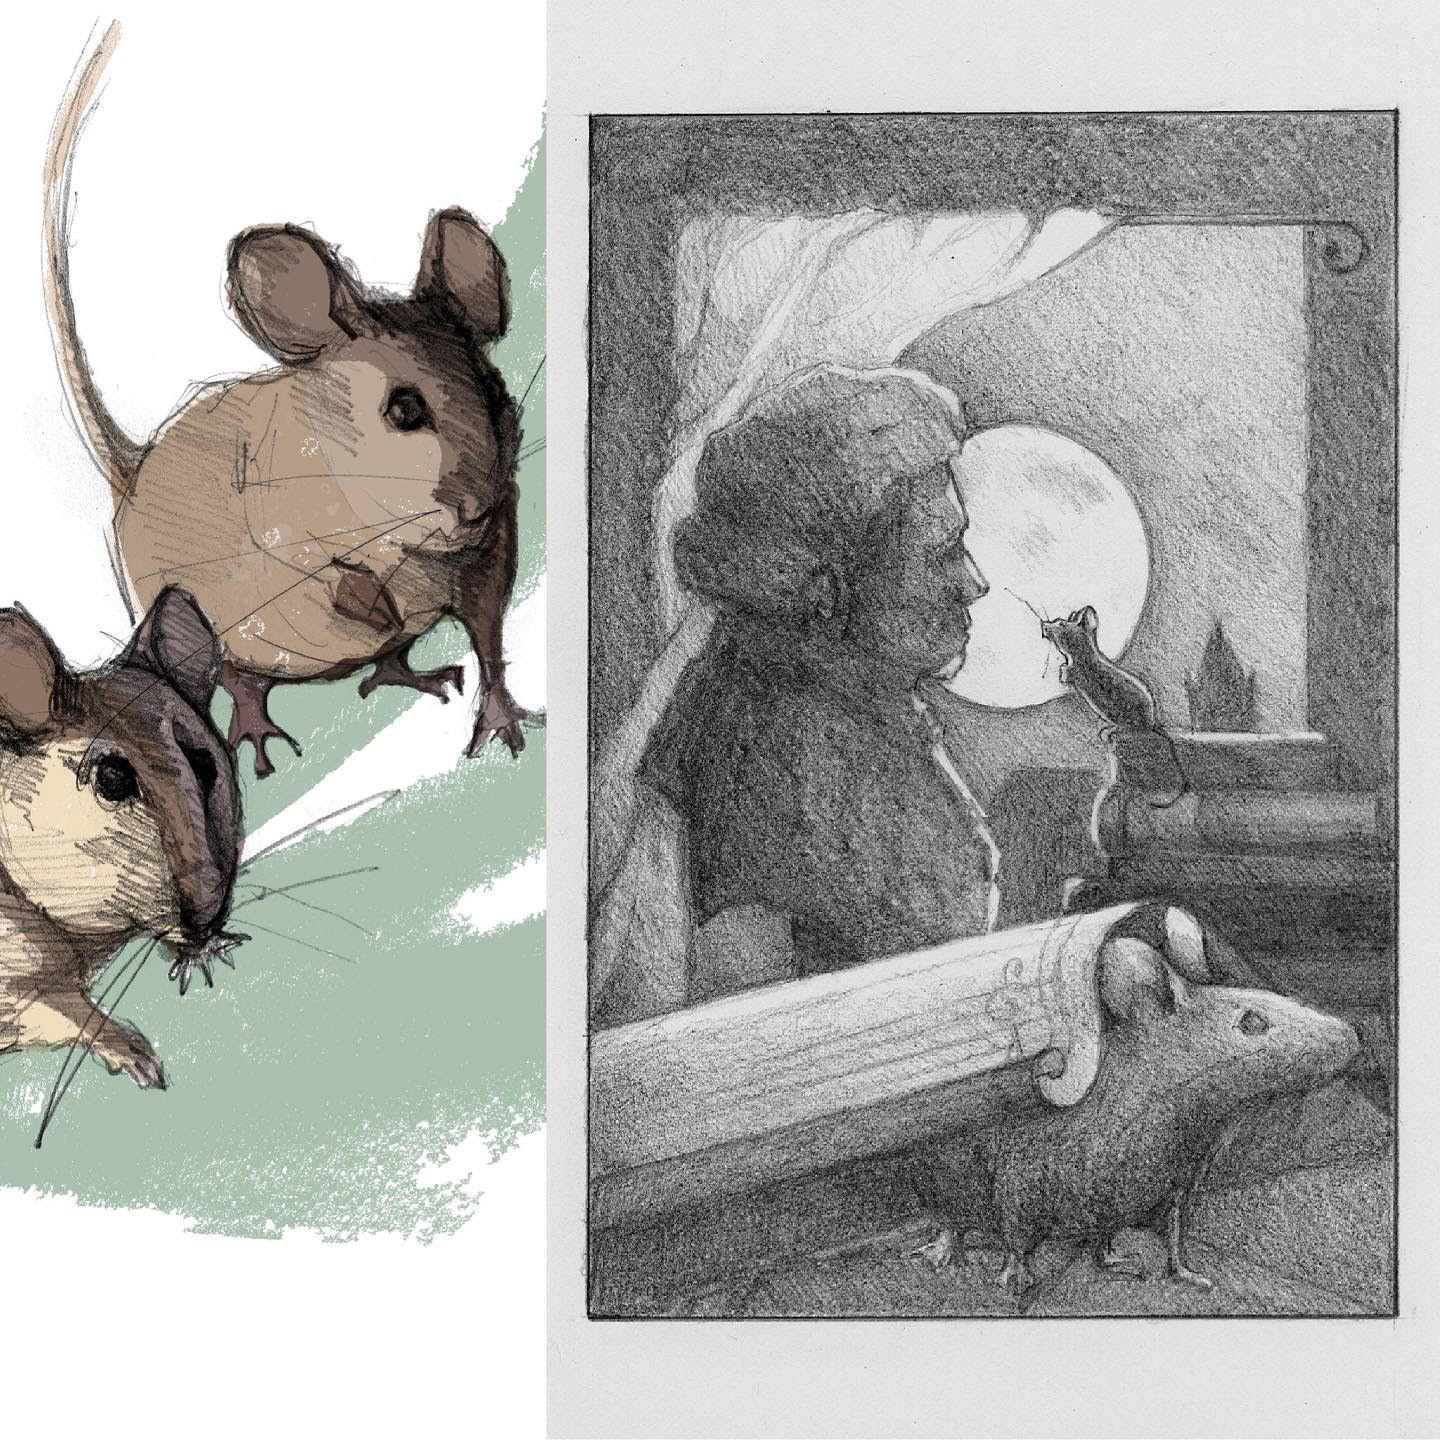 illustrations of mice and a woman